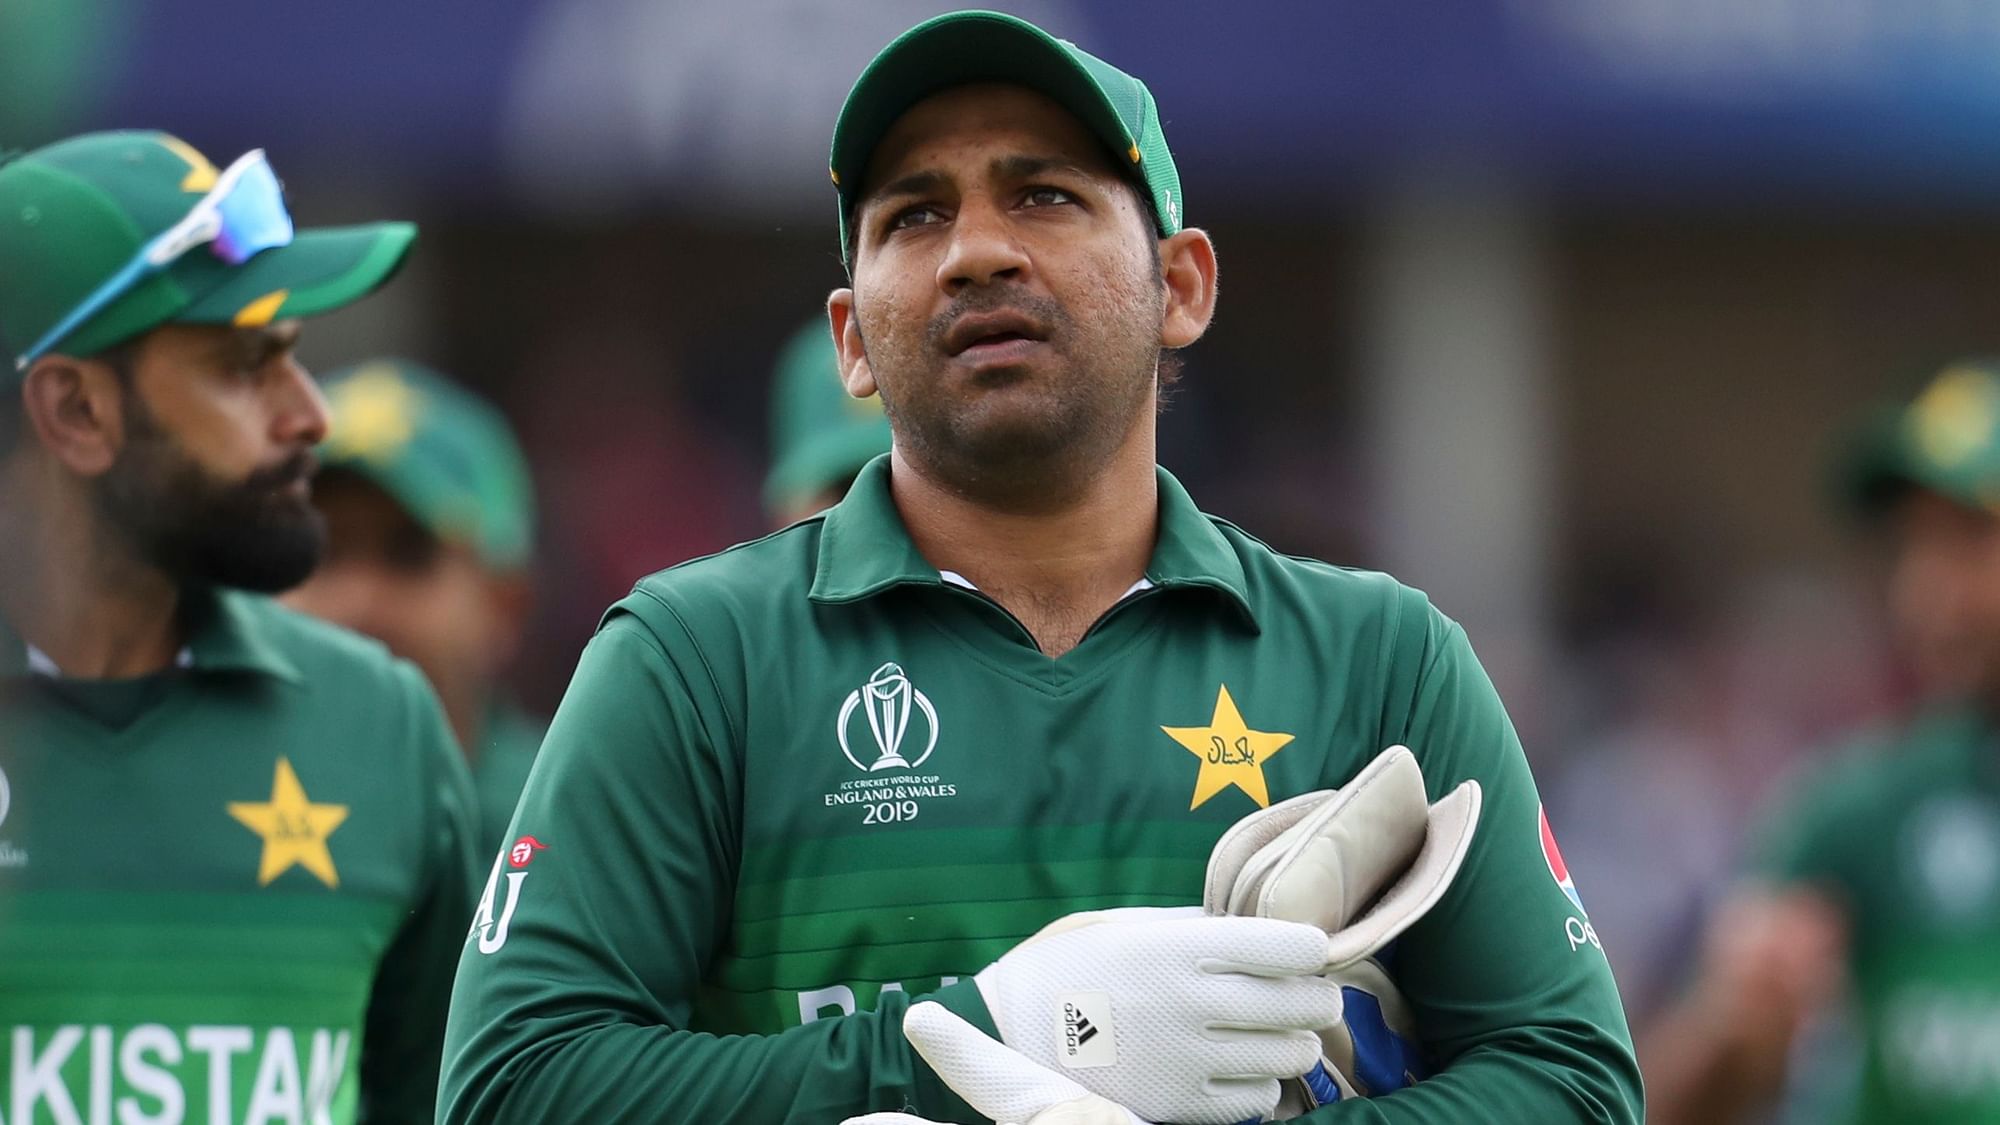 Pakistan skipper Sarfaraz Ahmed does not seem too affected by the defeat to arch-rivals India in their World Cup match.